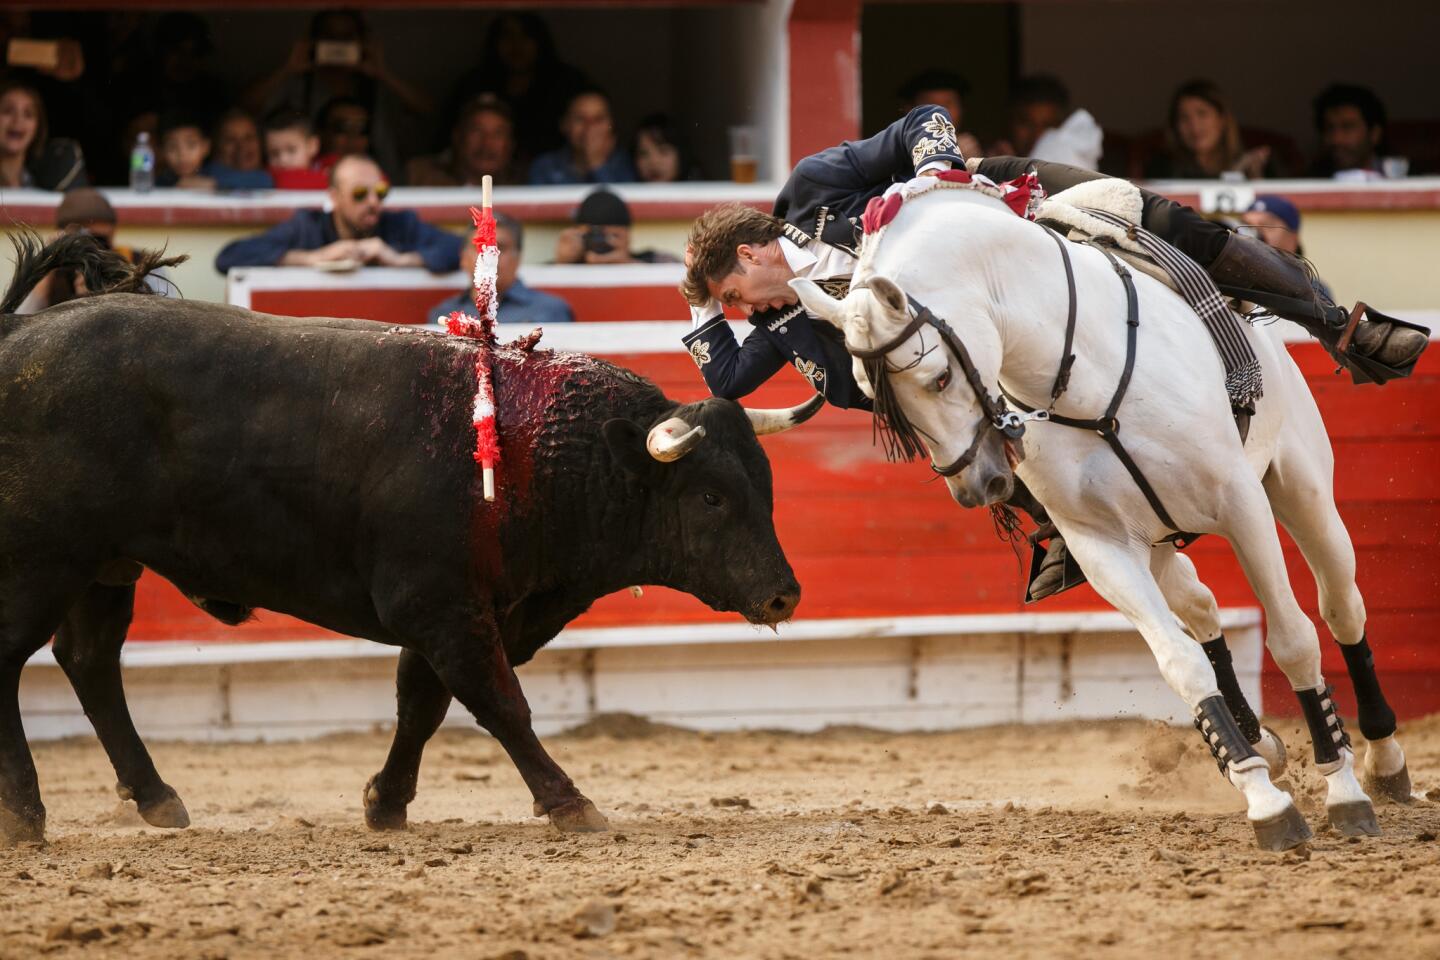 Pablo Hermoso de Mendoza places his elbow on the head of a bull while circling it during a bullfight at Plaza de Toros Monumental de Tijuana on Sunday.